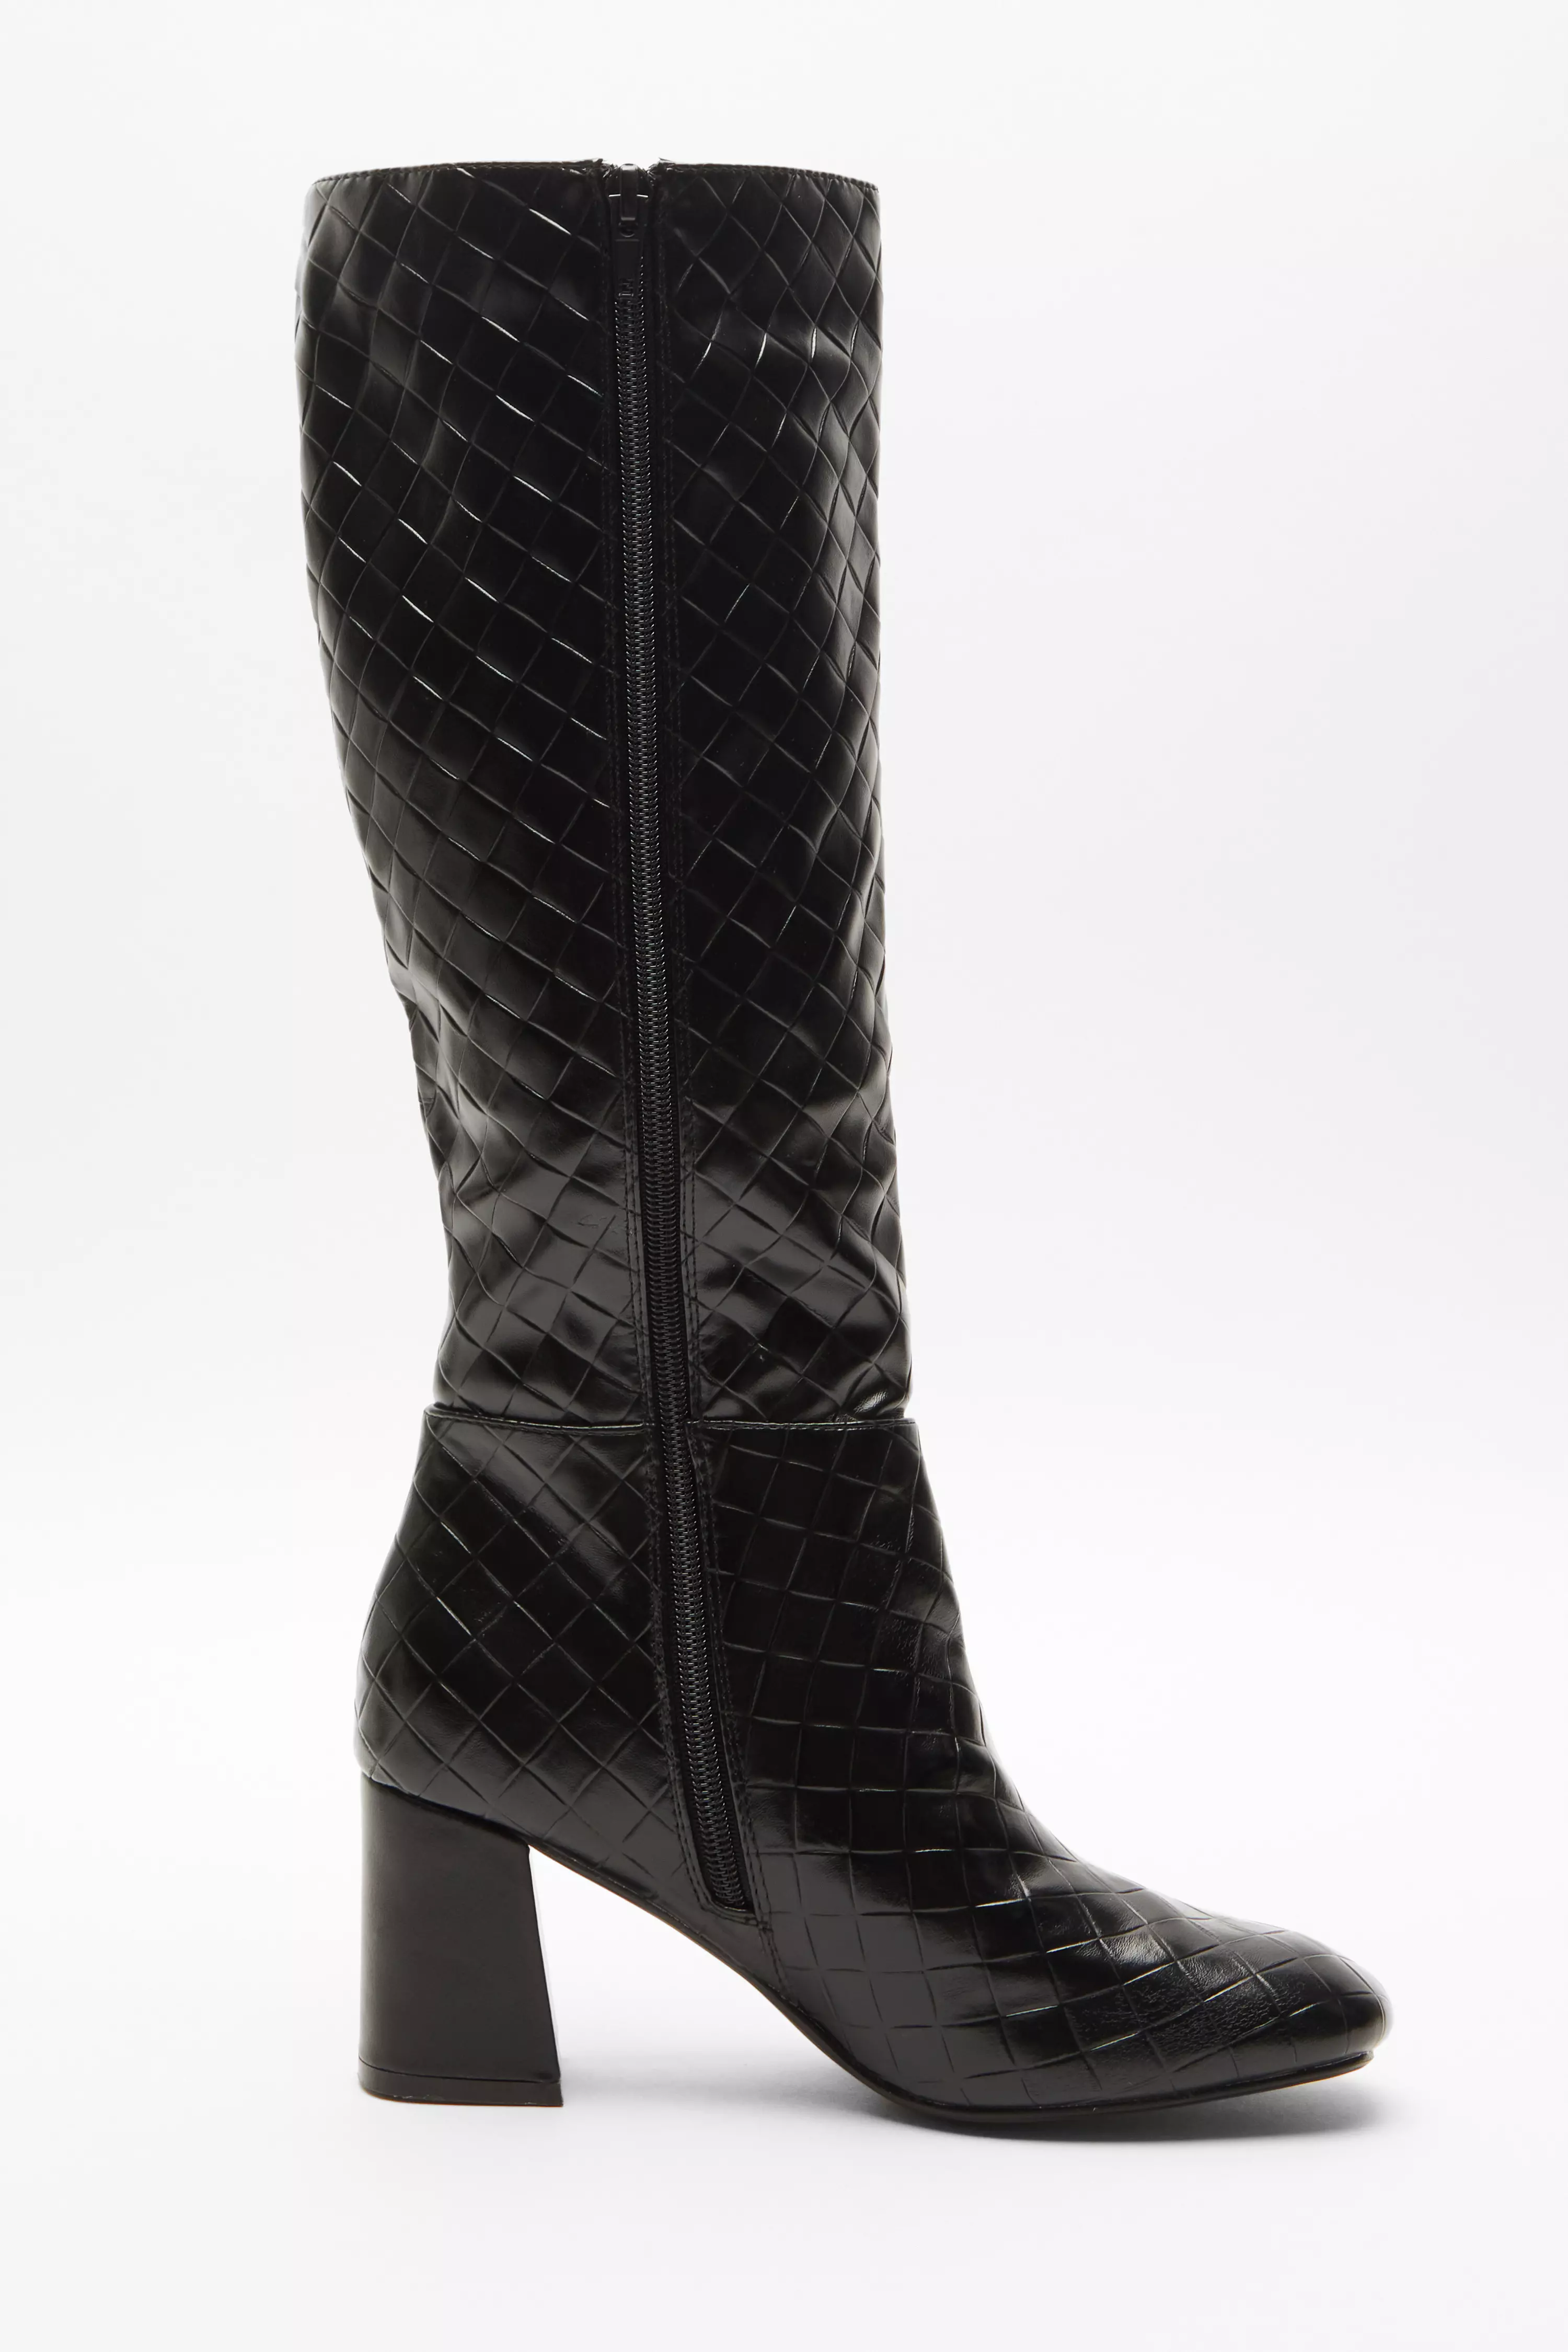 Black Faux Leather Textured Knee High Boots